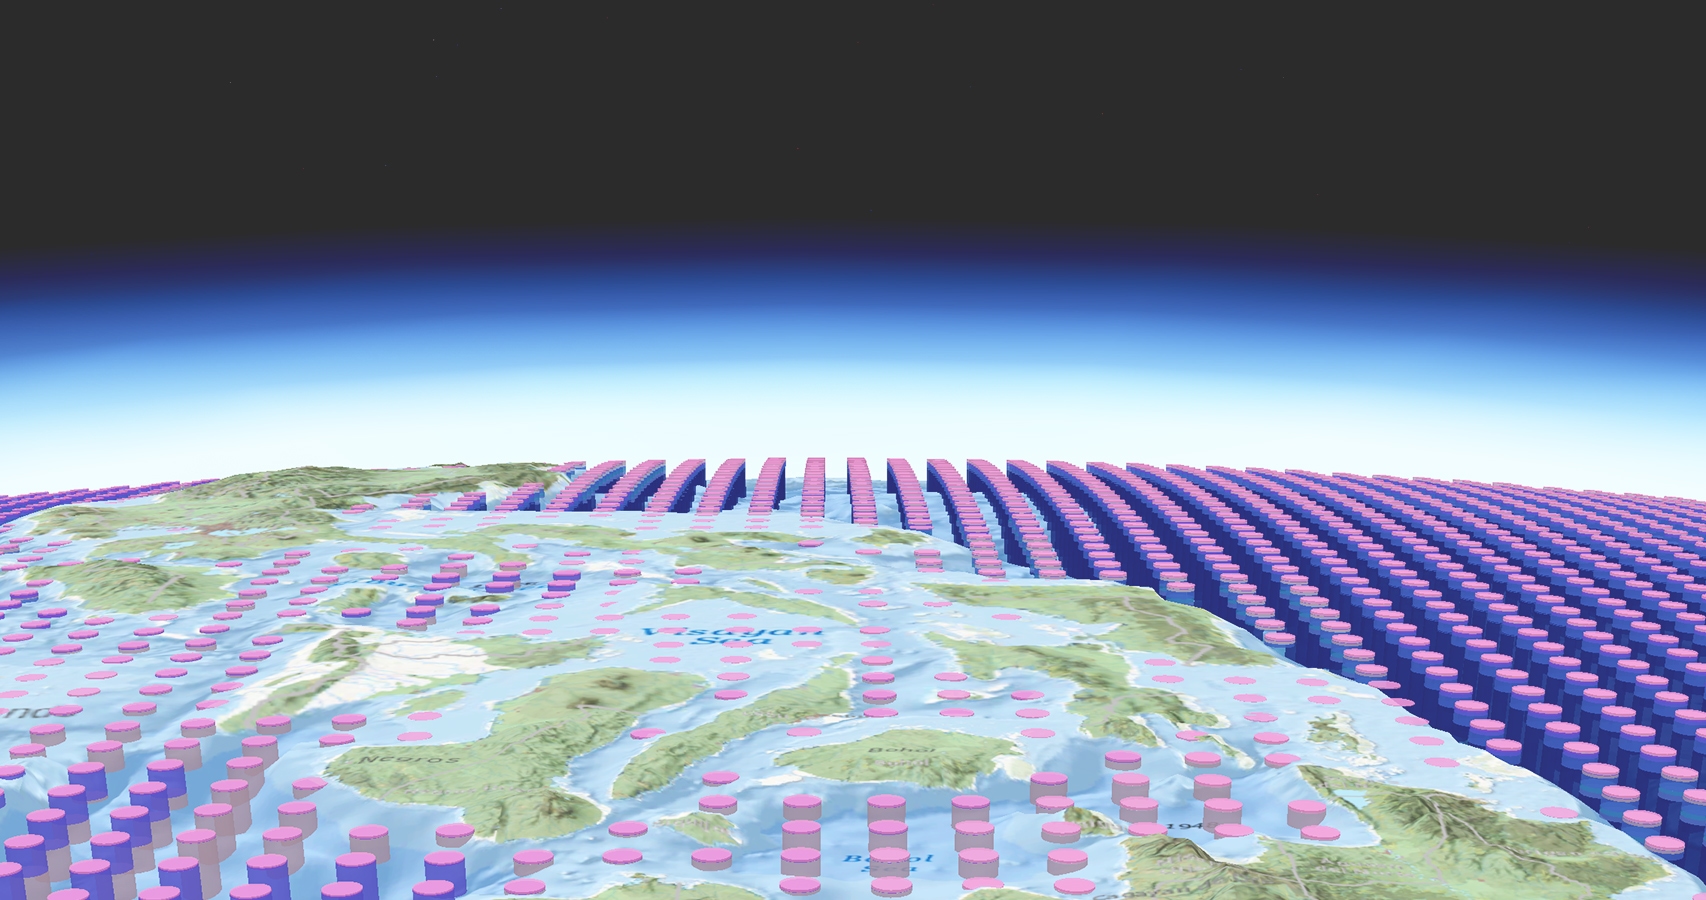 A graphic with rows of pink and purple cylinders laid in neat rows overlaying a stylized contour map of the Earth